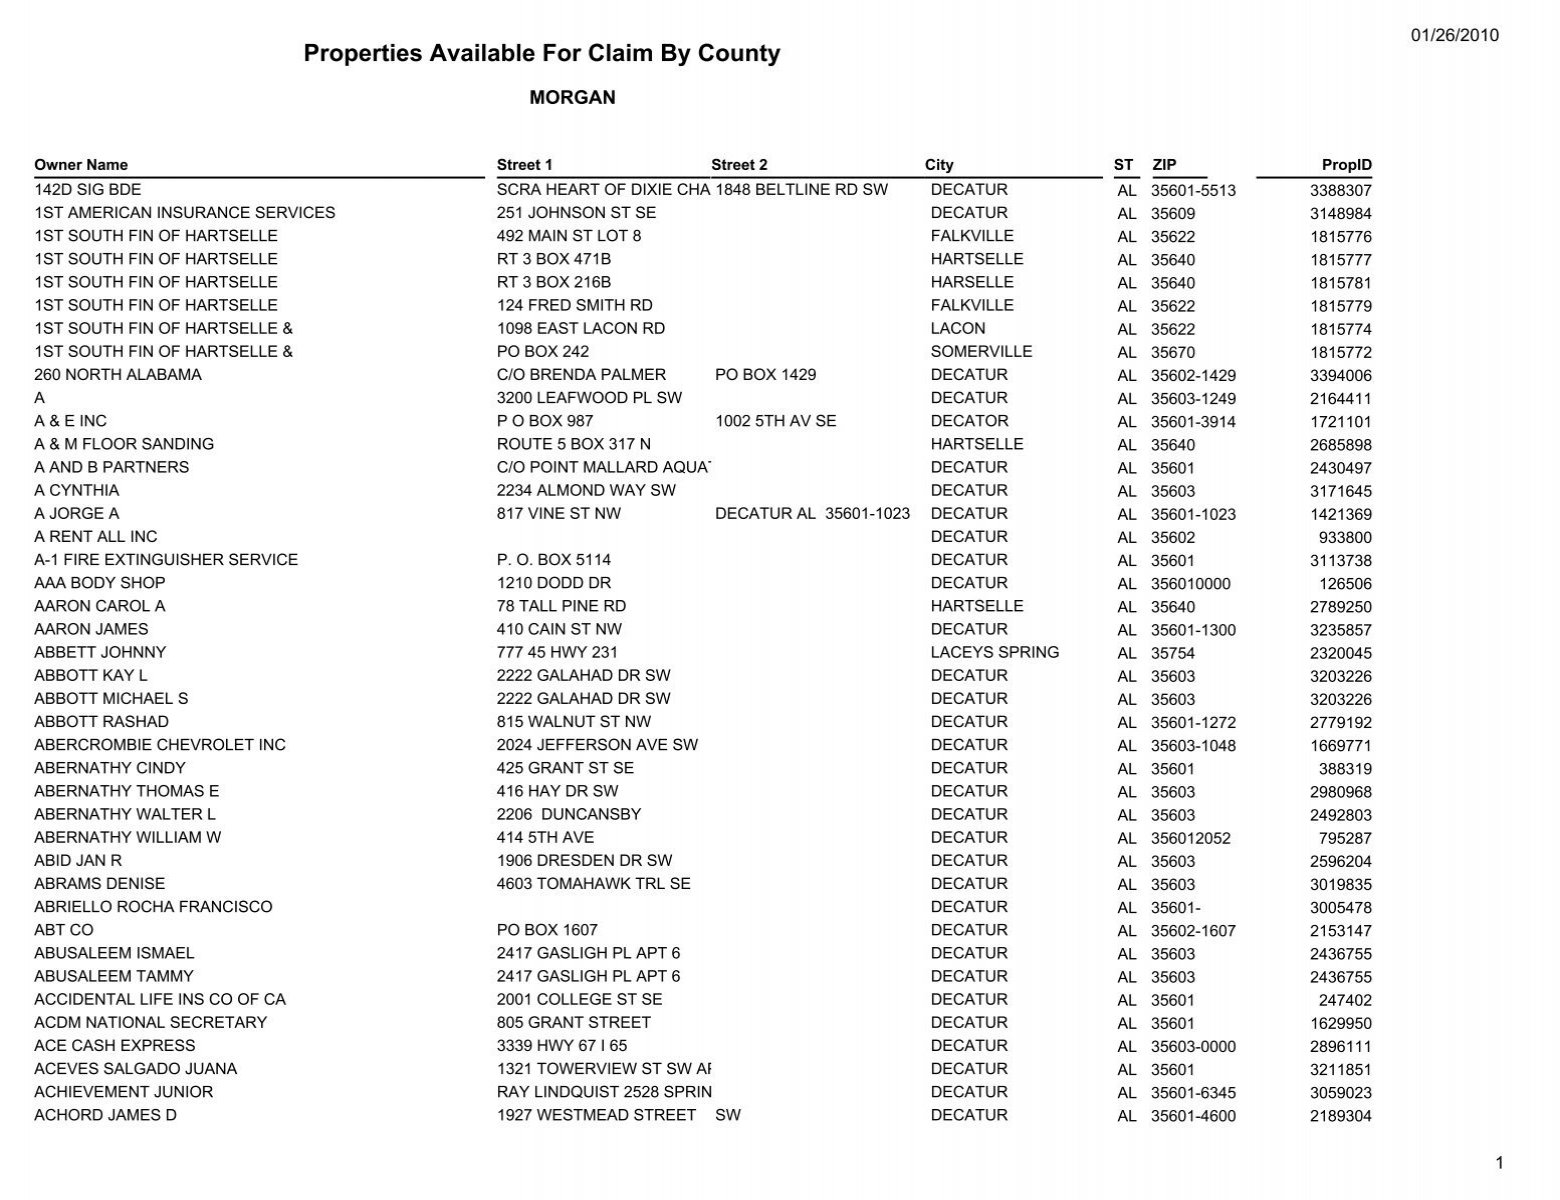 Properties Available For Claim By County - Morgan County Probate